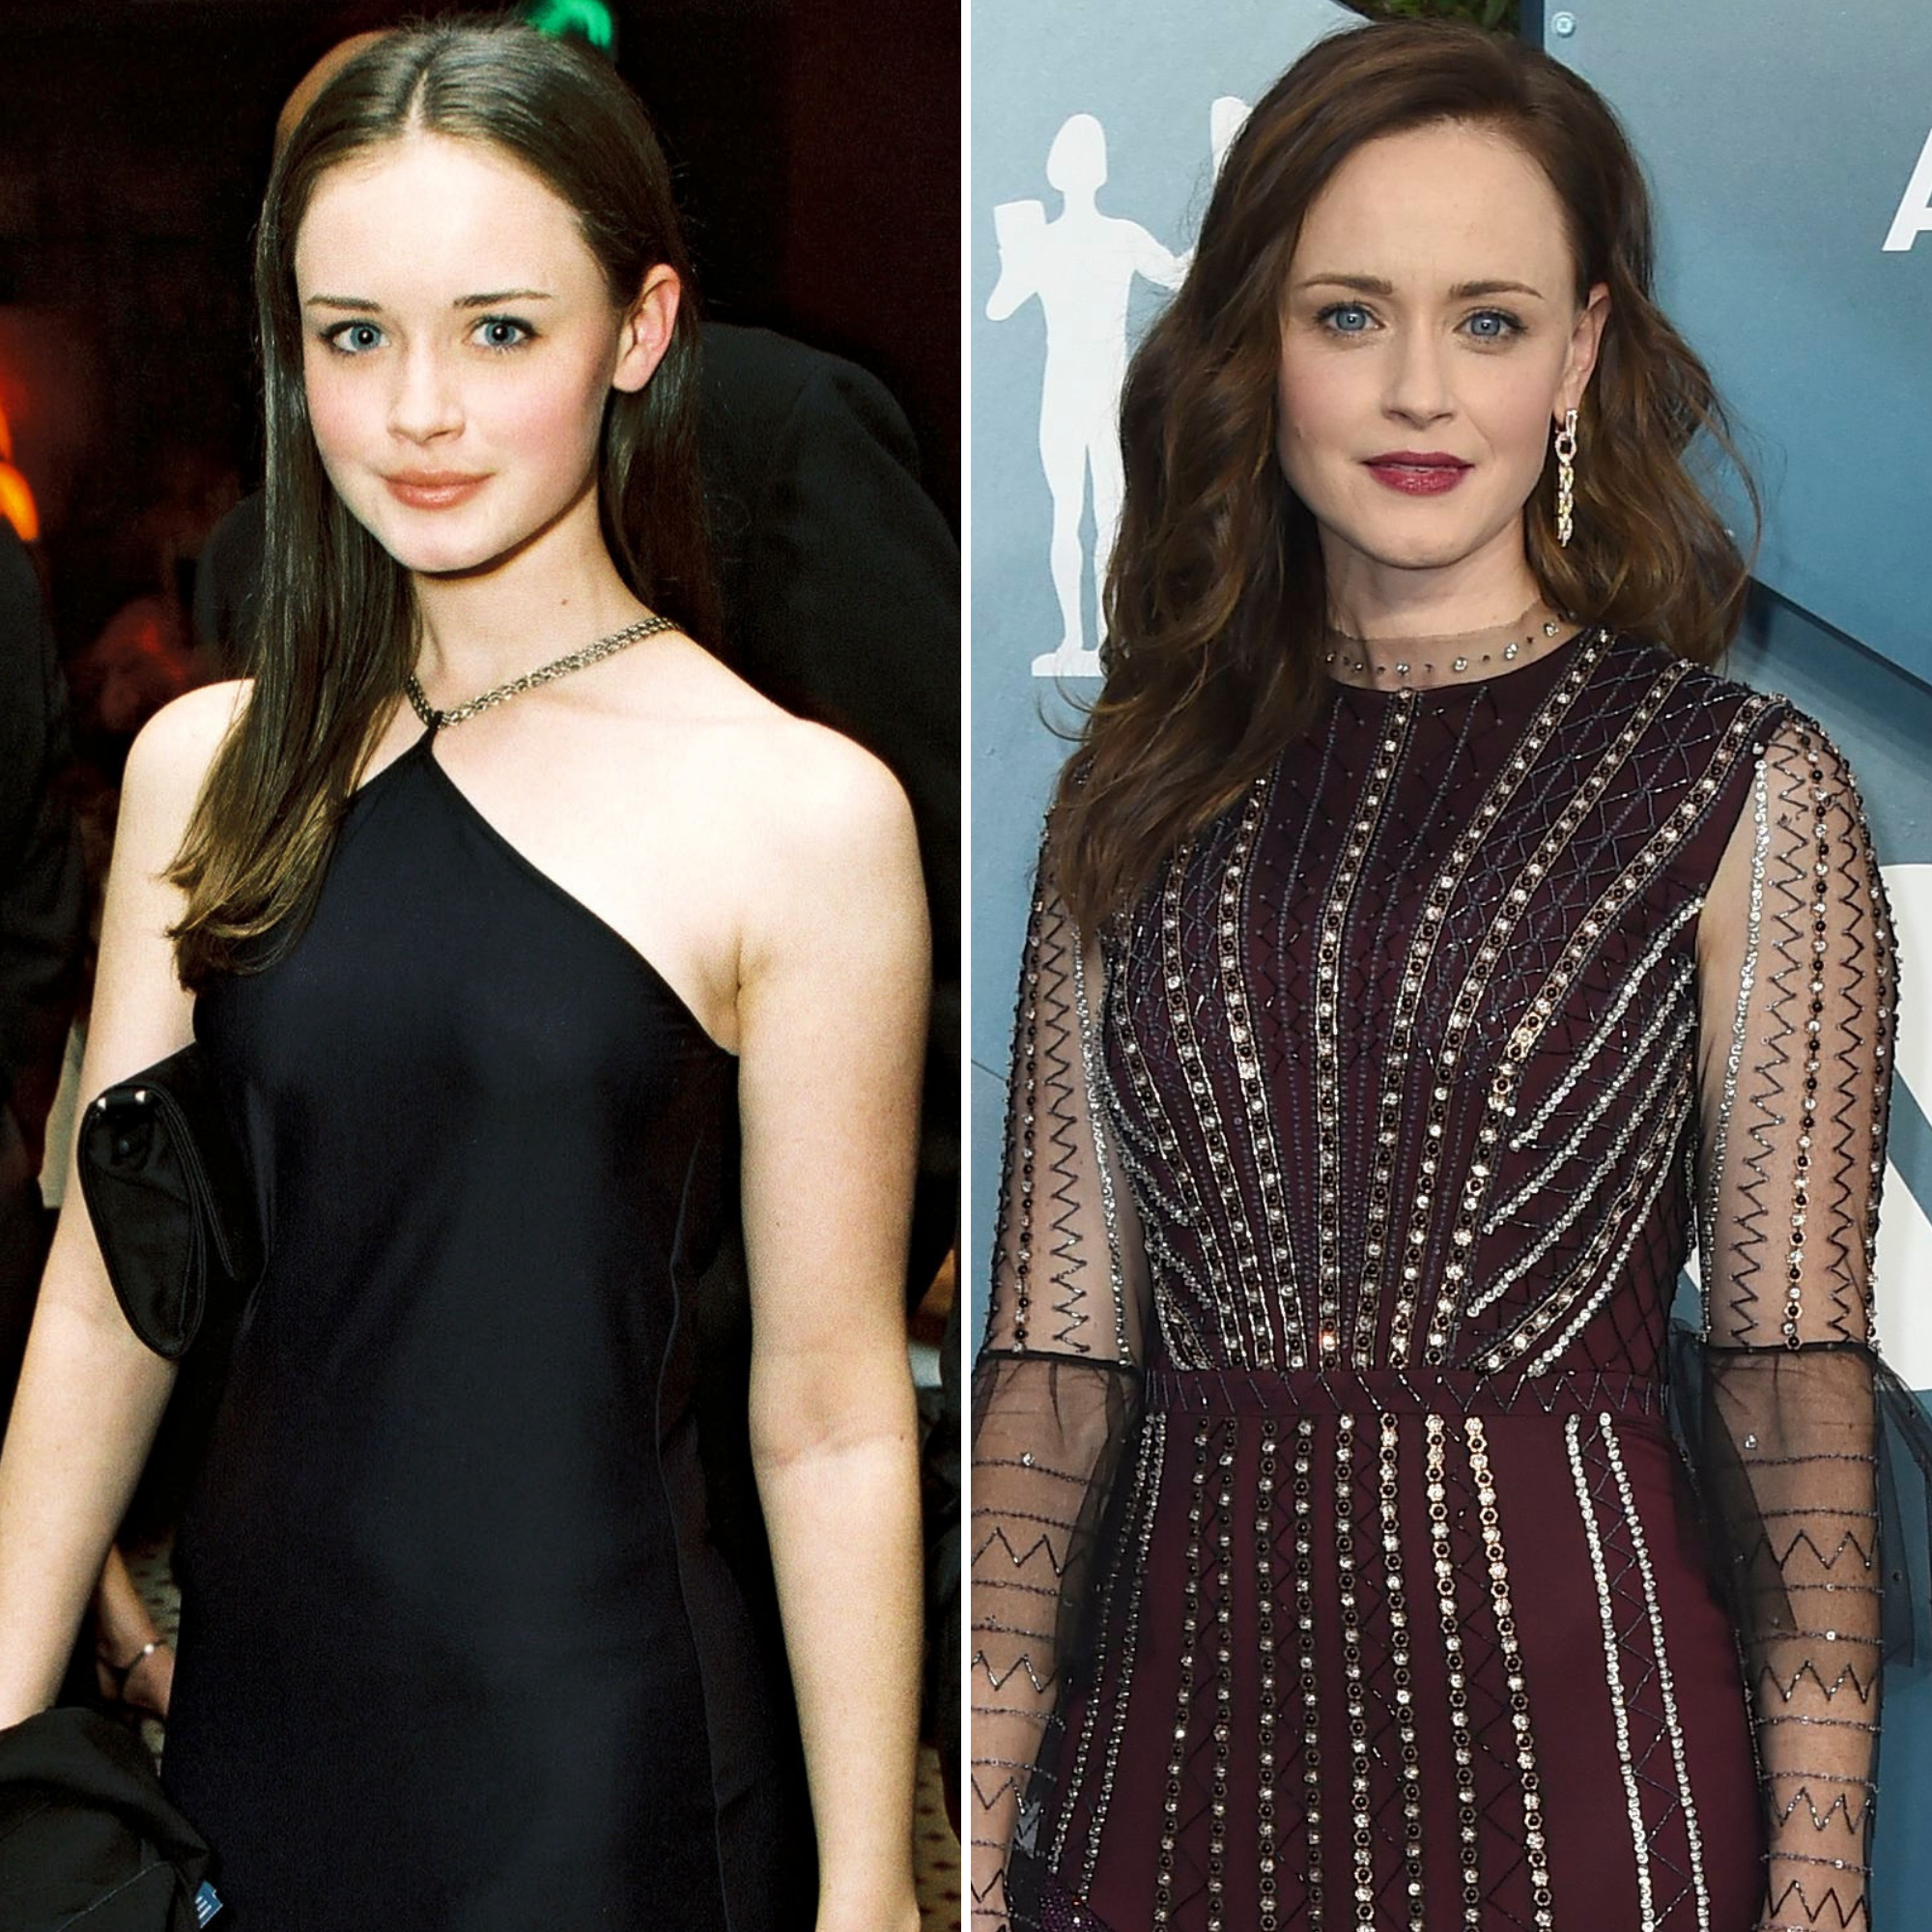 Bledel alexis dated has who 20 Interesting